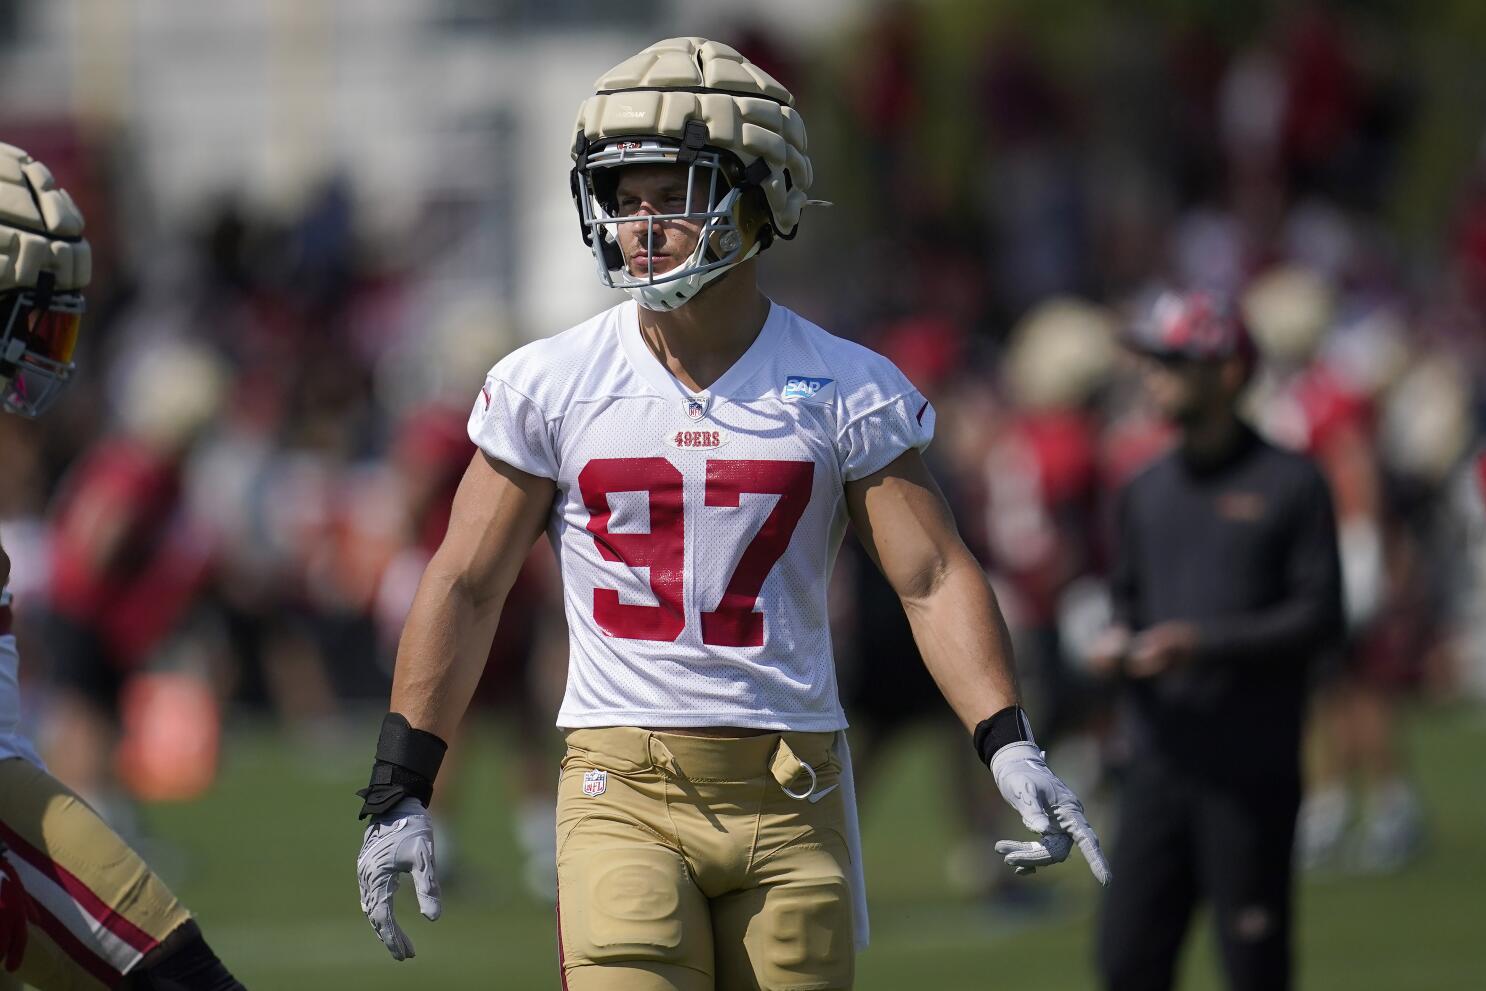 Nick Bosa vs Joey Bosa - Why they need just 4 moves to DOMINATE